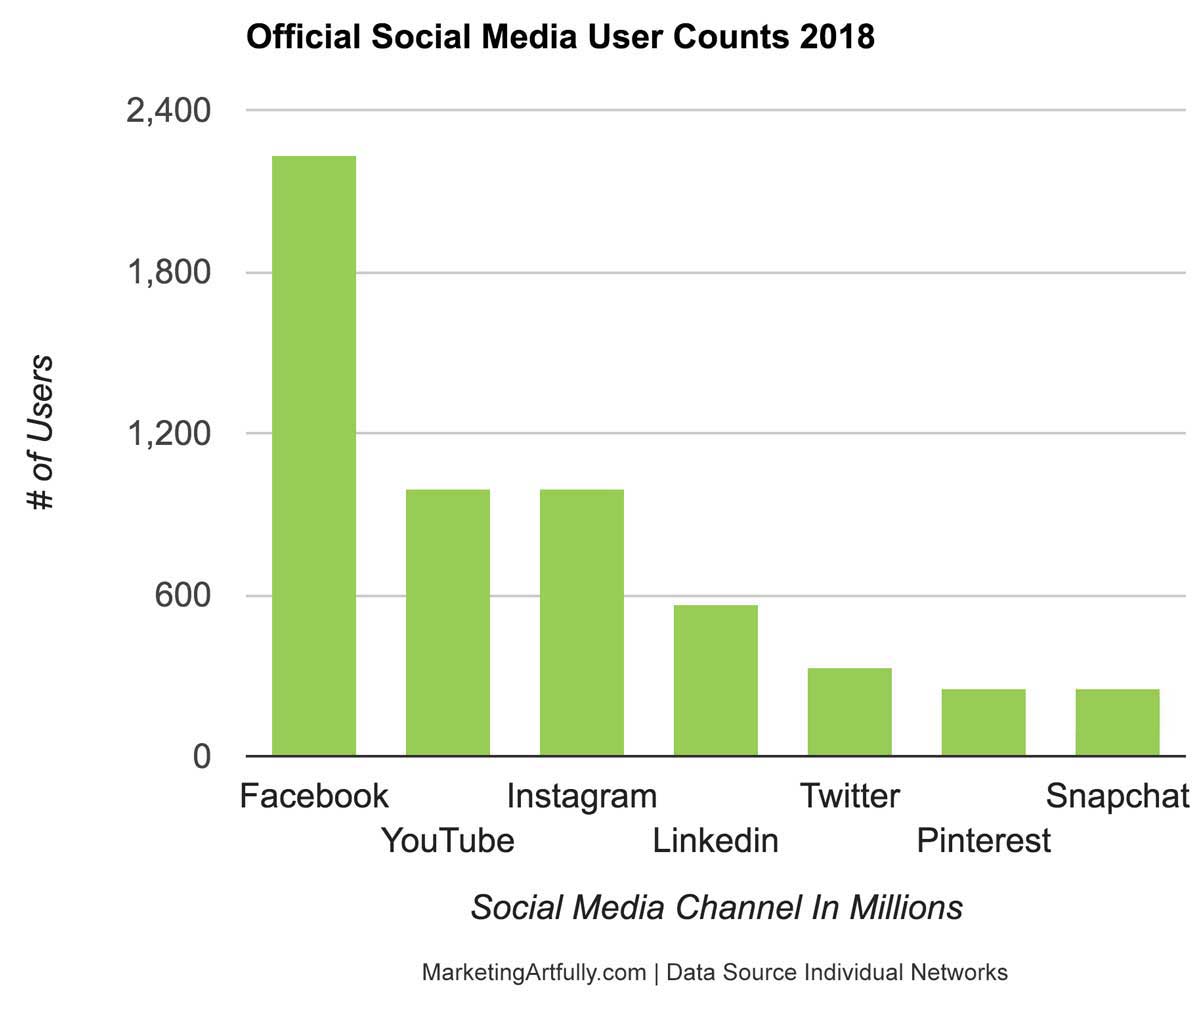 Social Media User Accounts In Millions of Users 2018